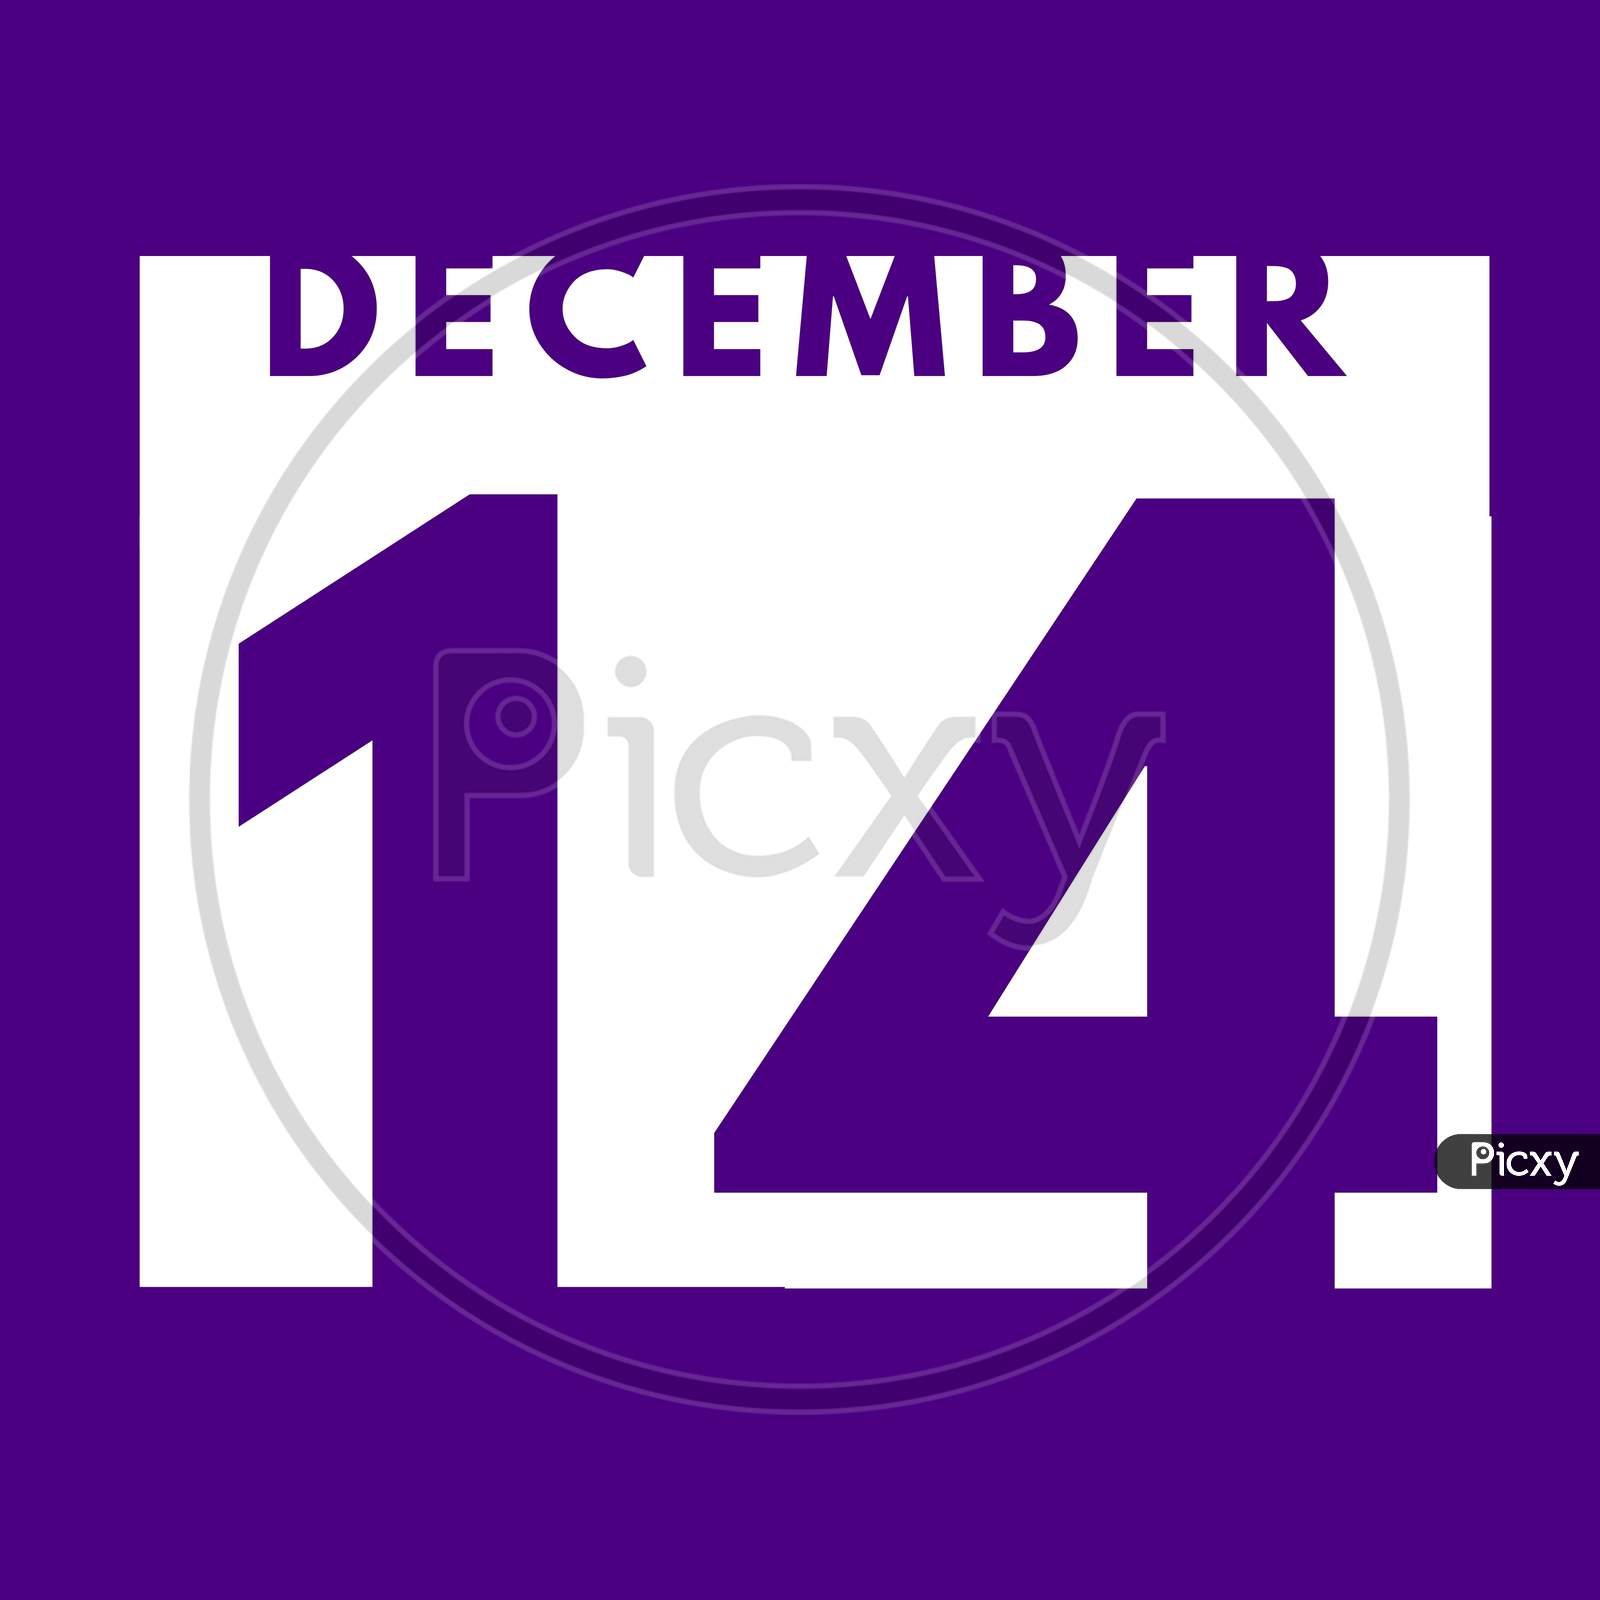 December 14 . Flat Modern Daily Calendar Icon .Date ,Day, Month .Calendar For The Month Of December